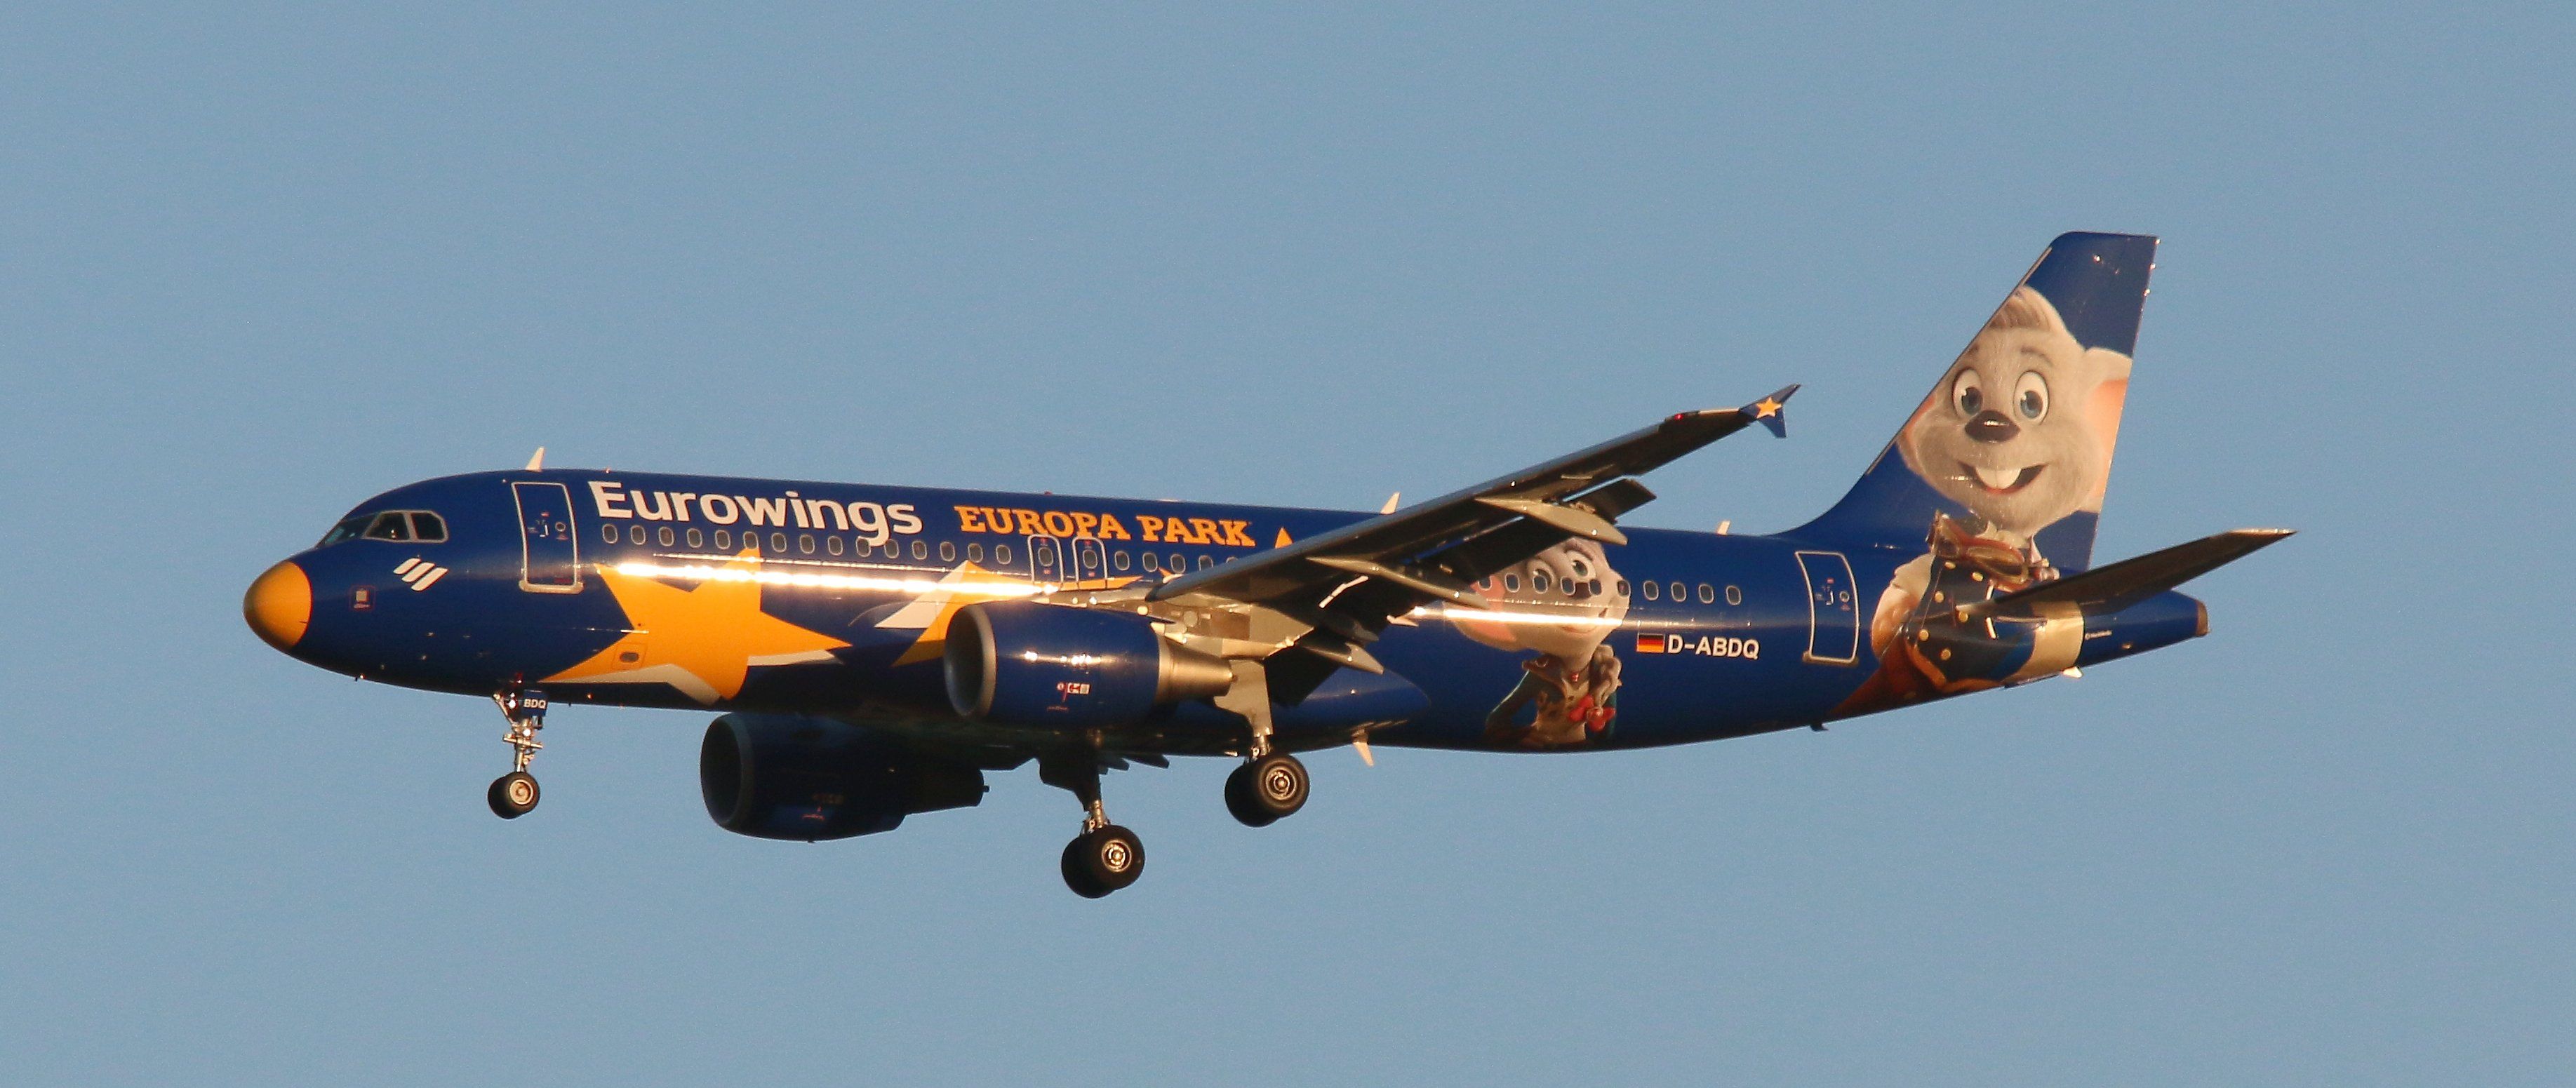 A Eurowings Airbus A320s in Europa Park livery flying in the sky.